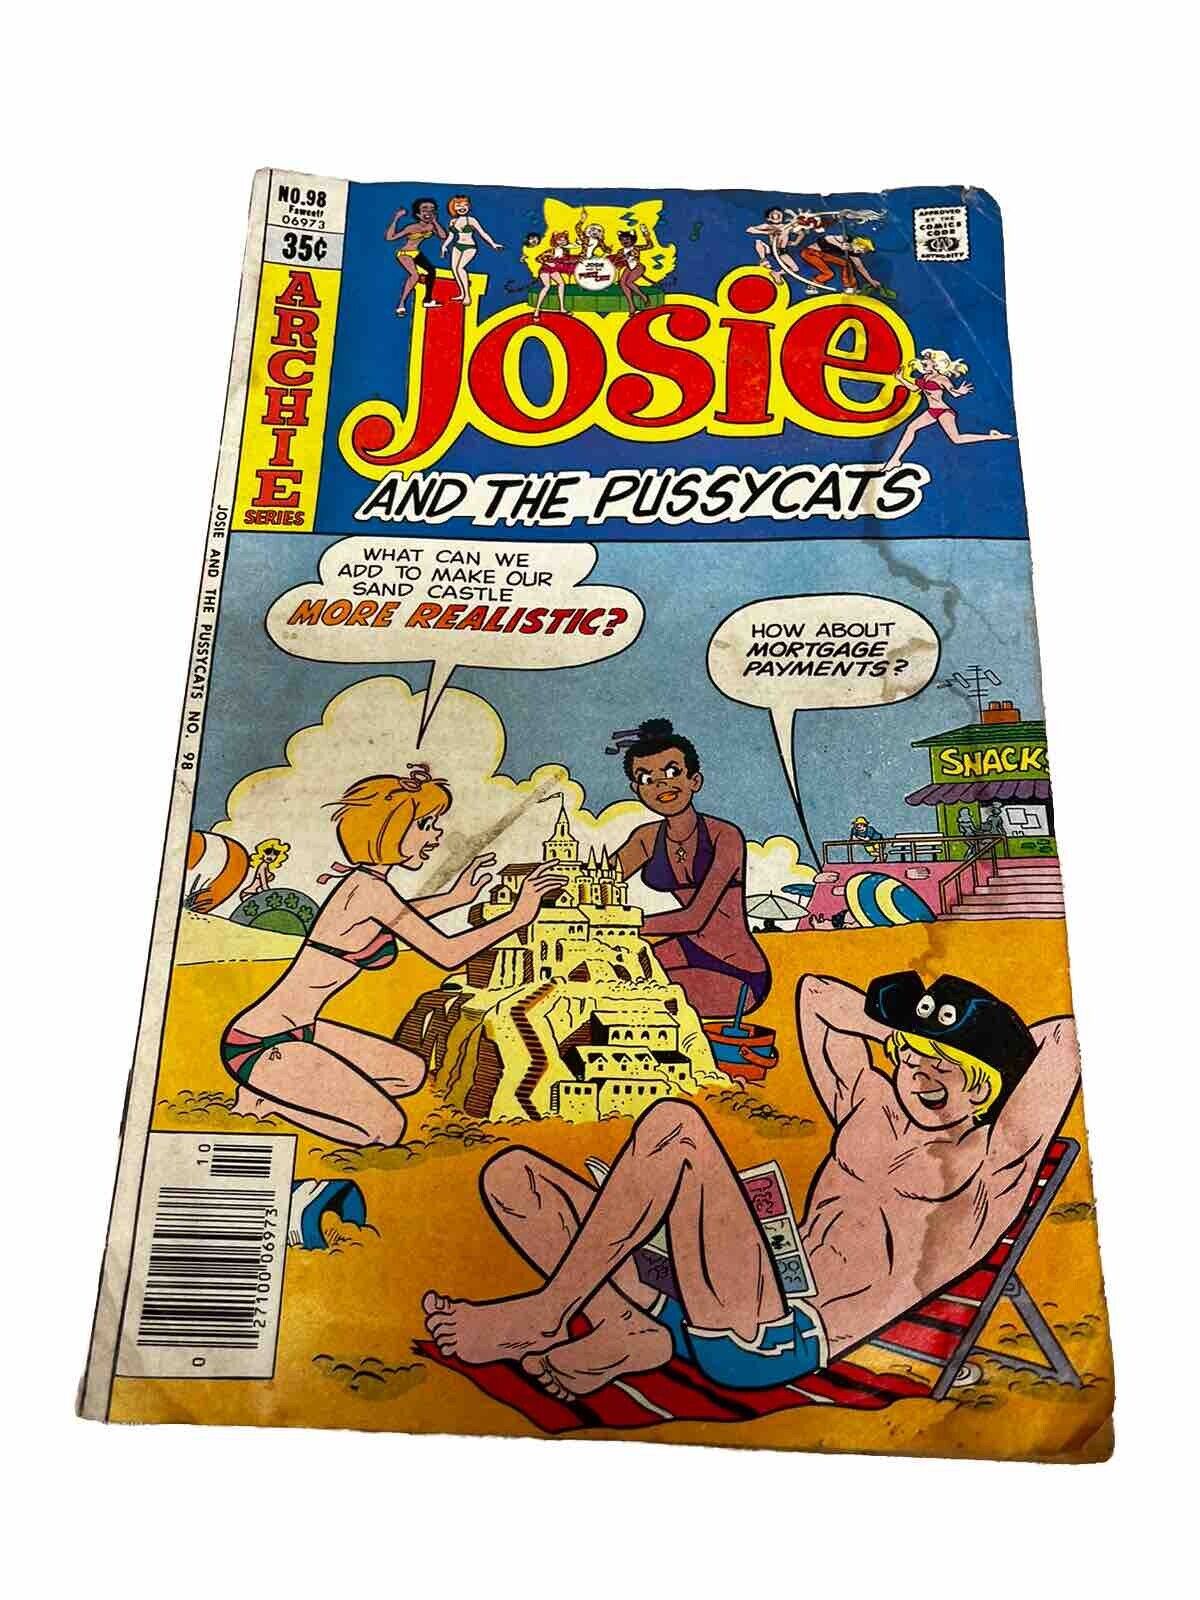 Archie Series No. 98 Fawcett 06973 Josie and the Pussycats